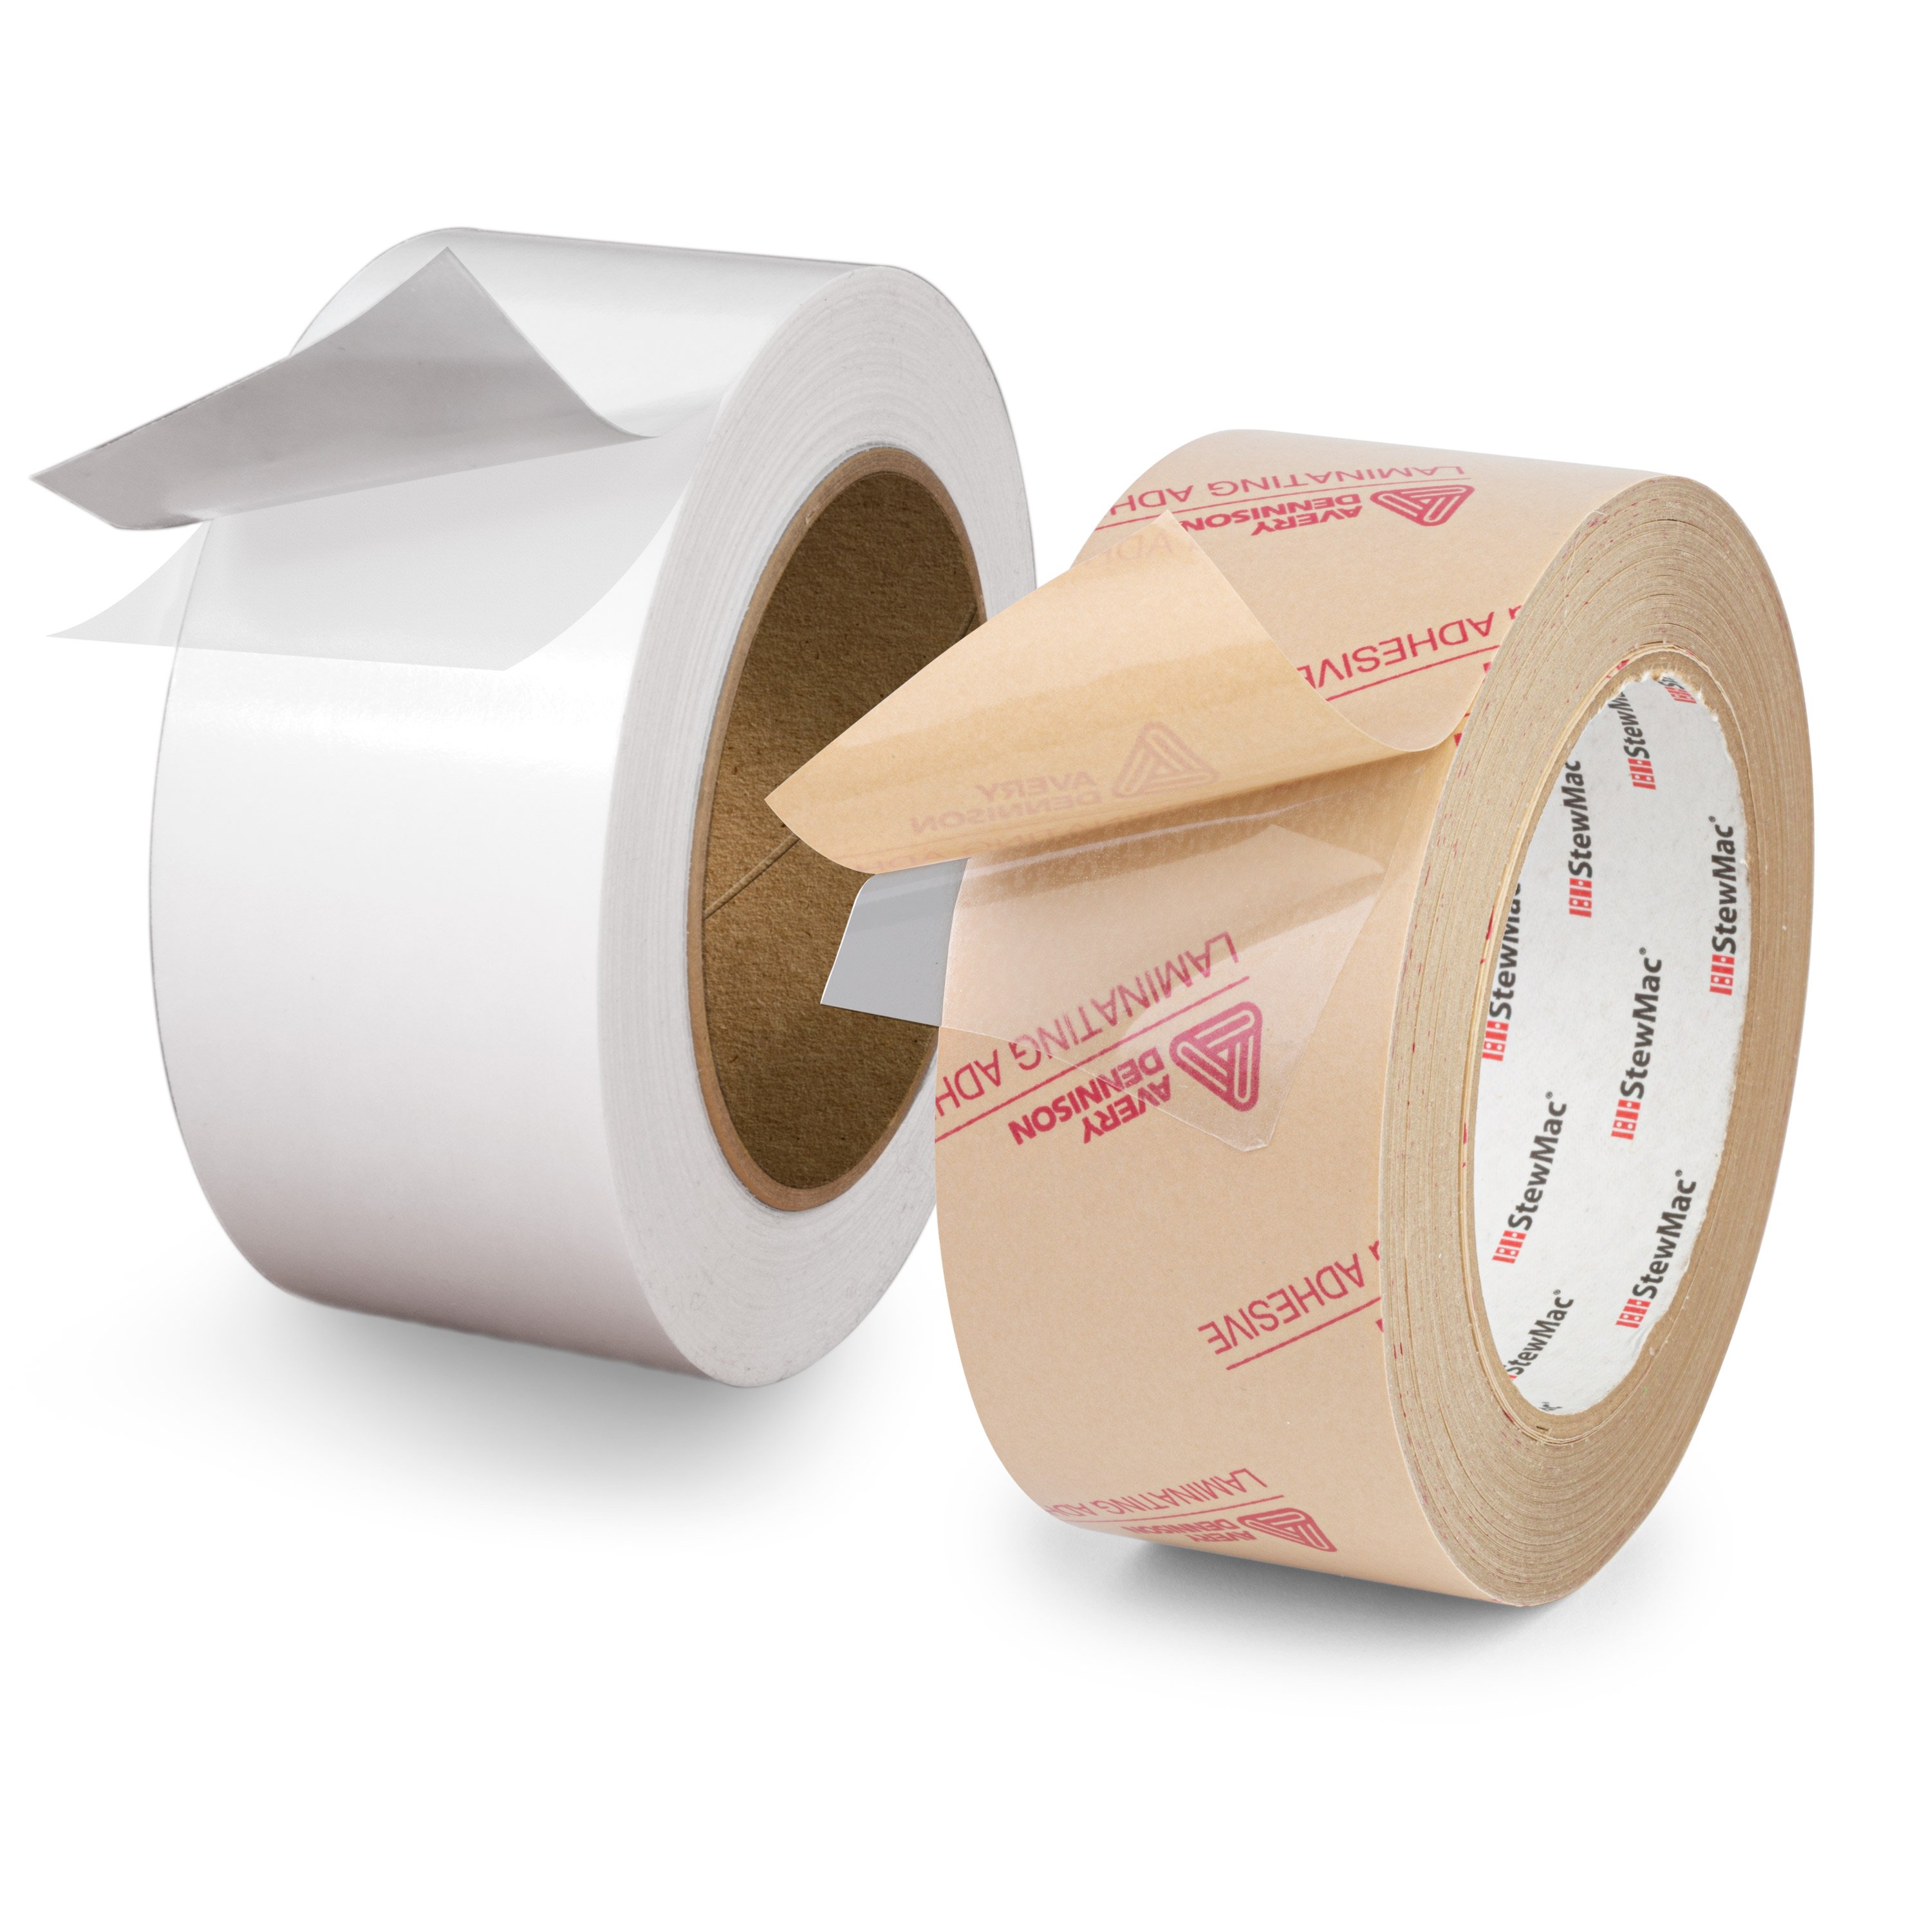 Double-Stick Tape, Set of 2 from StewMac. StewMac